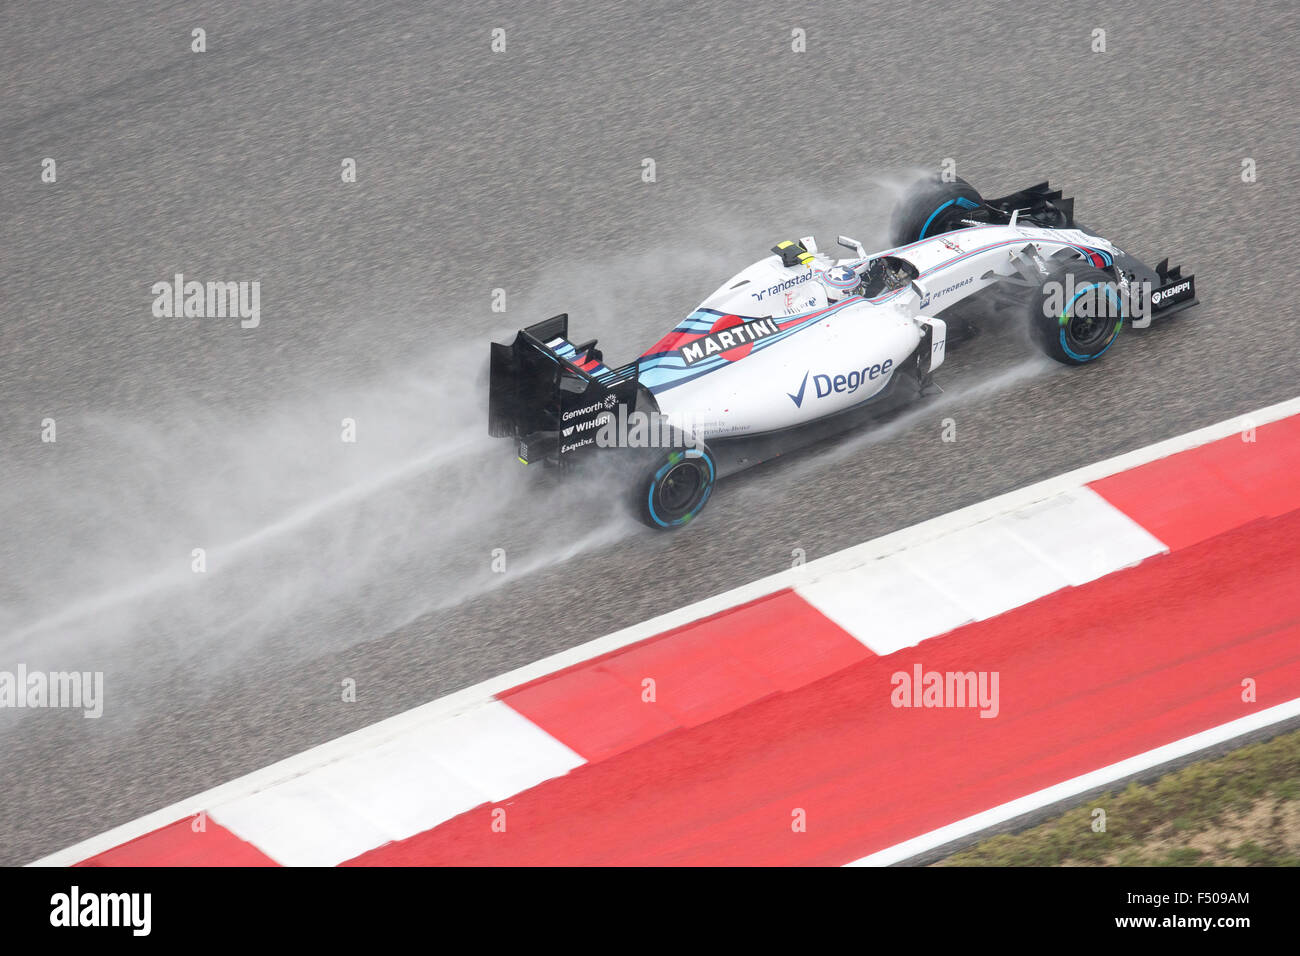 Austin, Texas USA October 25, 2015: Formula 1  driver Valtteri Bottas of Williams Martini races in qualifying at a soaked Circuit of the Americas track in Sunday. Race officials are insistent on keeping Sunday's United States Grand Prix on schedule despite continued bad weather. Credit:  Bob Daemmrich/Alamy Live News Stock Photo